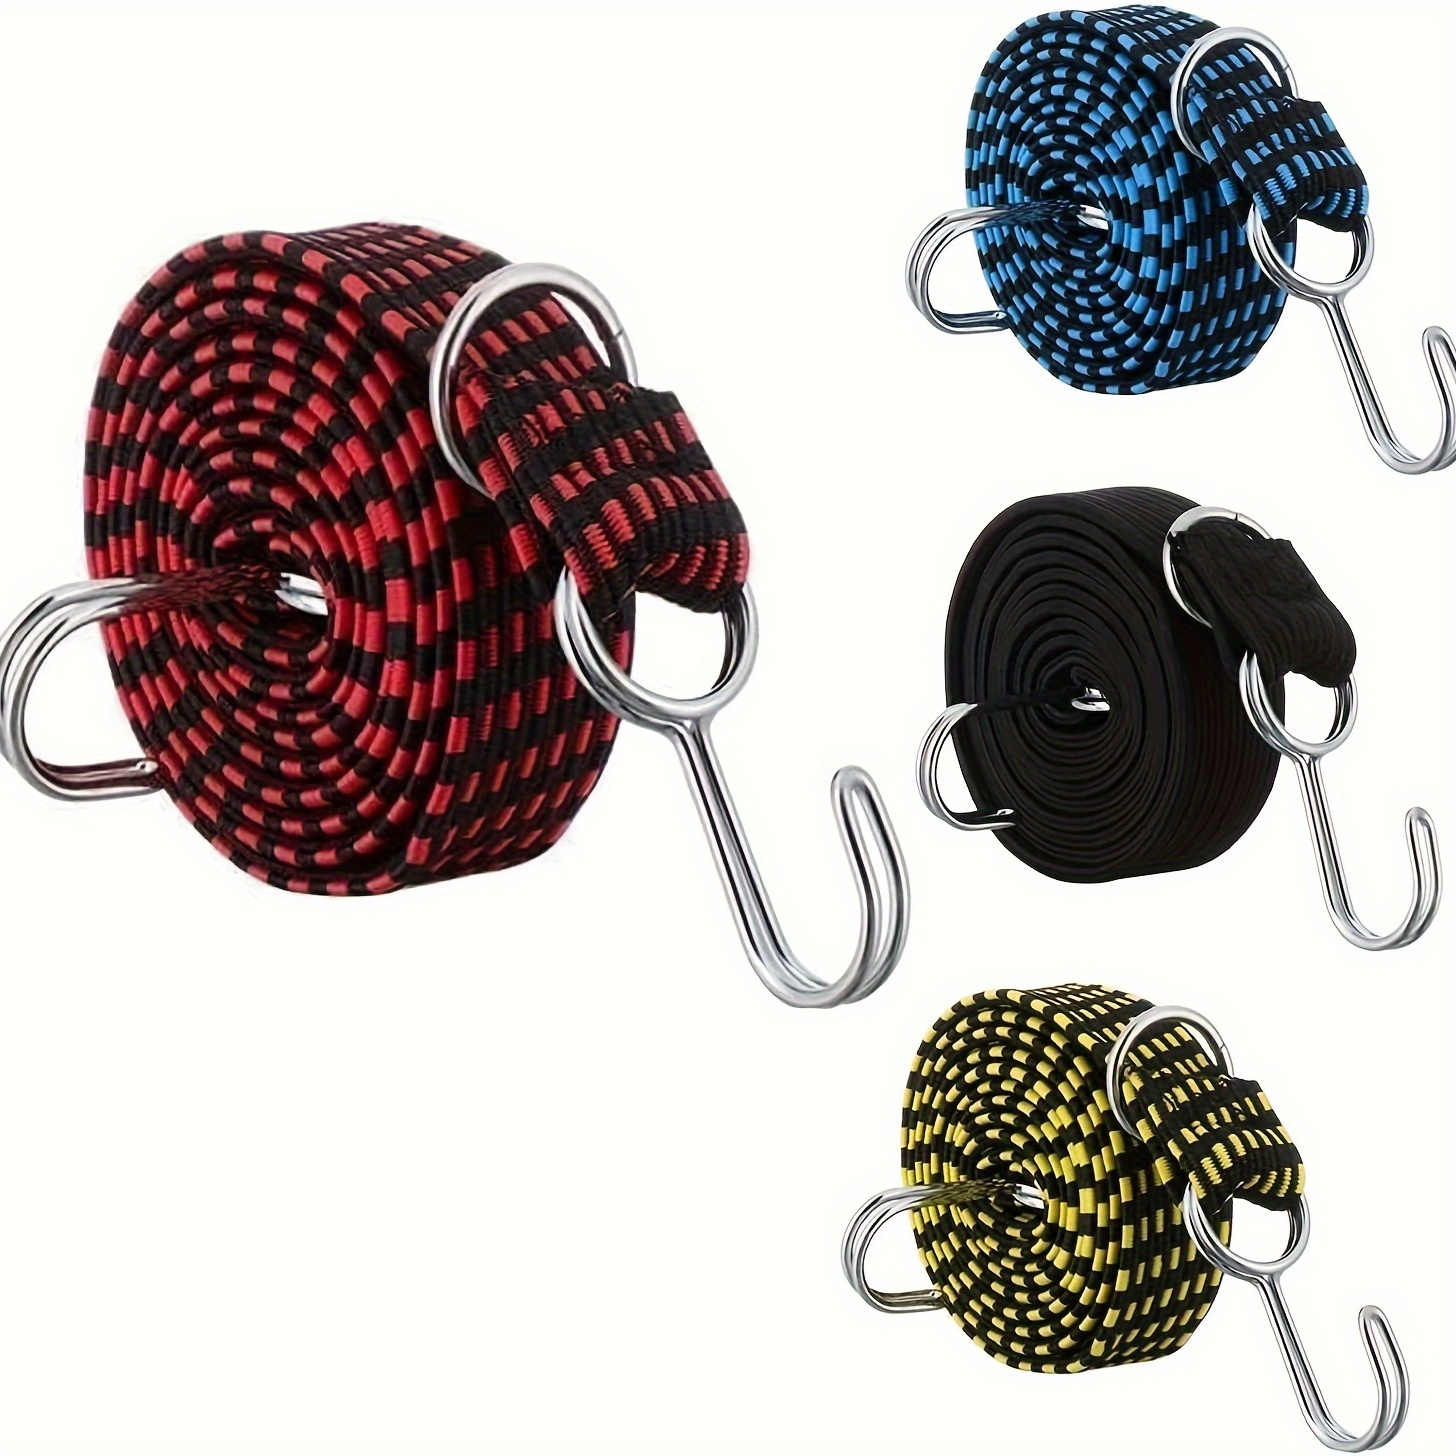 6 Pack 72-Inch Long Bungee Cords, Heavy Duty Bungee Straps With Durable  Metal Hooks for Bikes, Camping, Outdoors, Great for Tie Downs, and Secure  Your